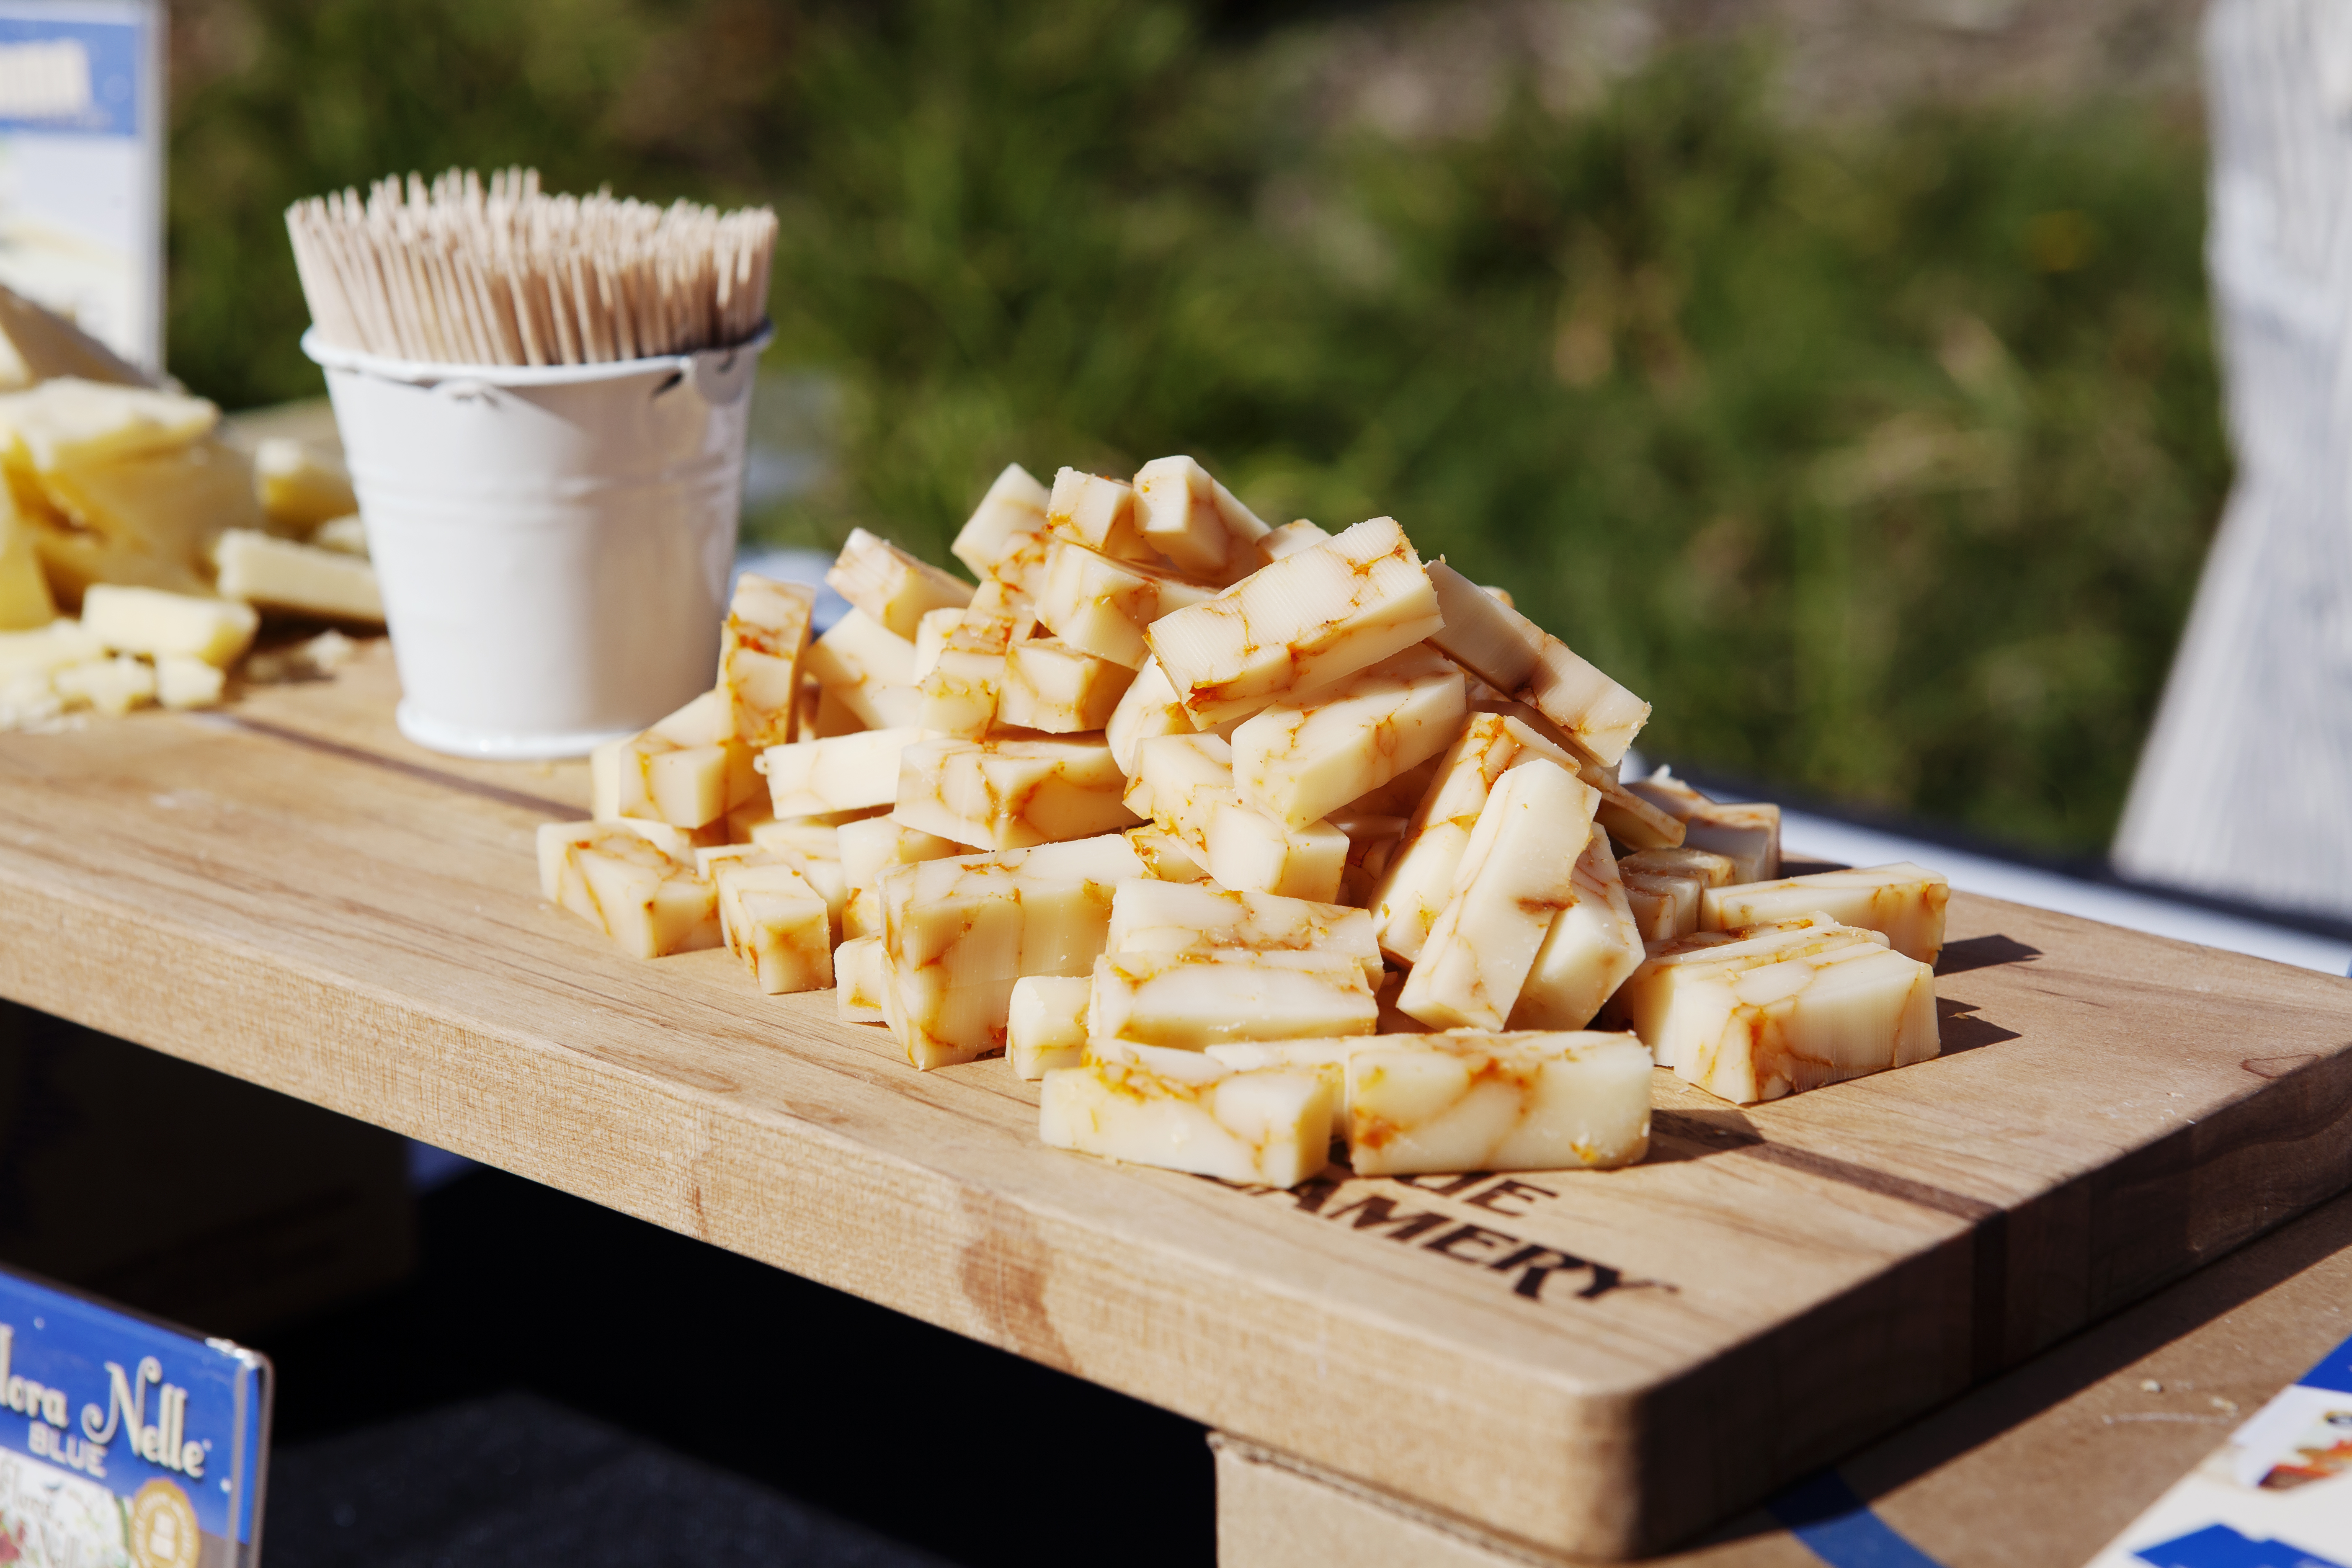 Atlanta’s Cheesiest Event is Back for a 5th Year